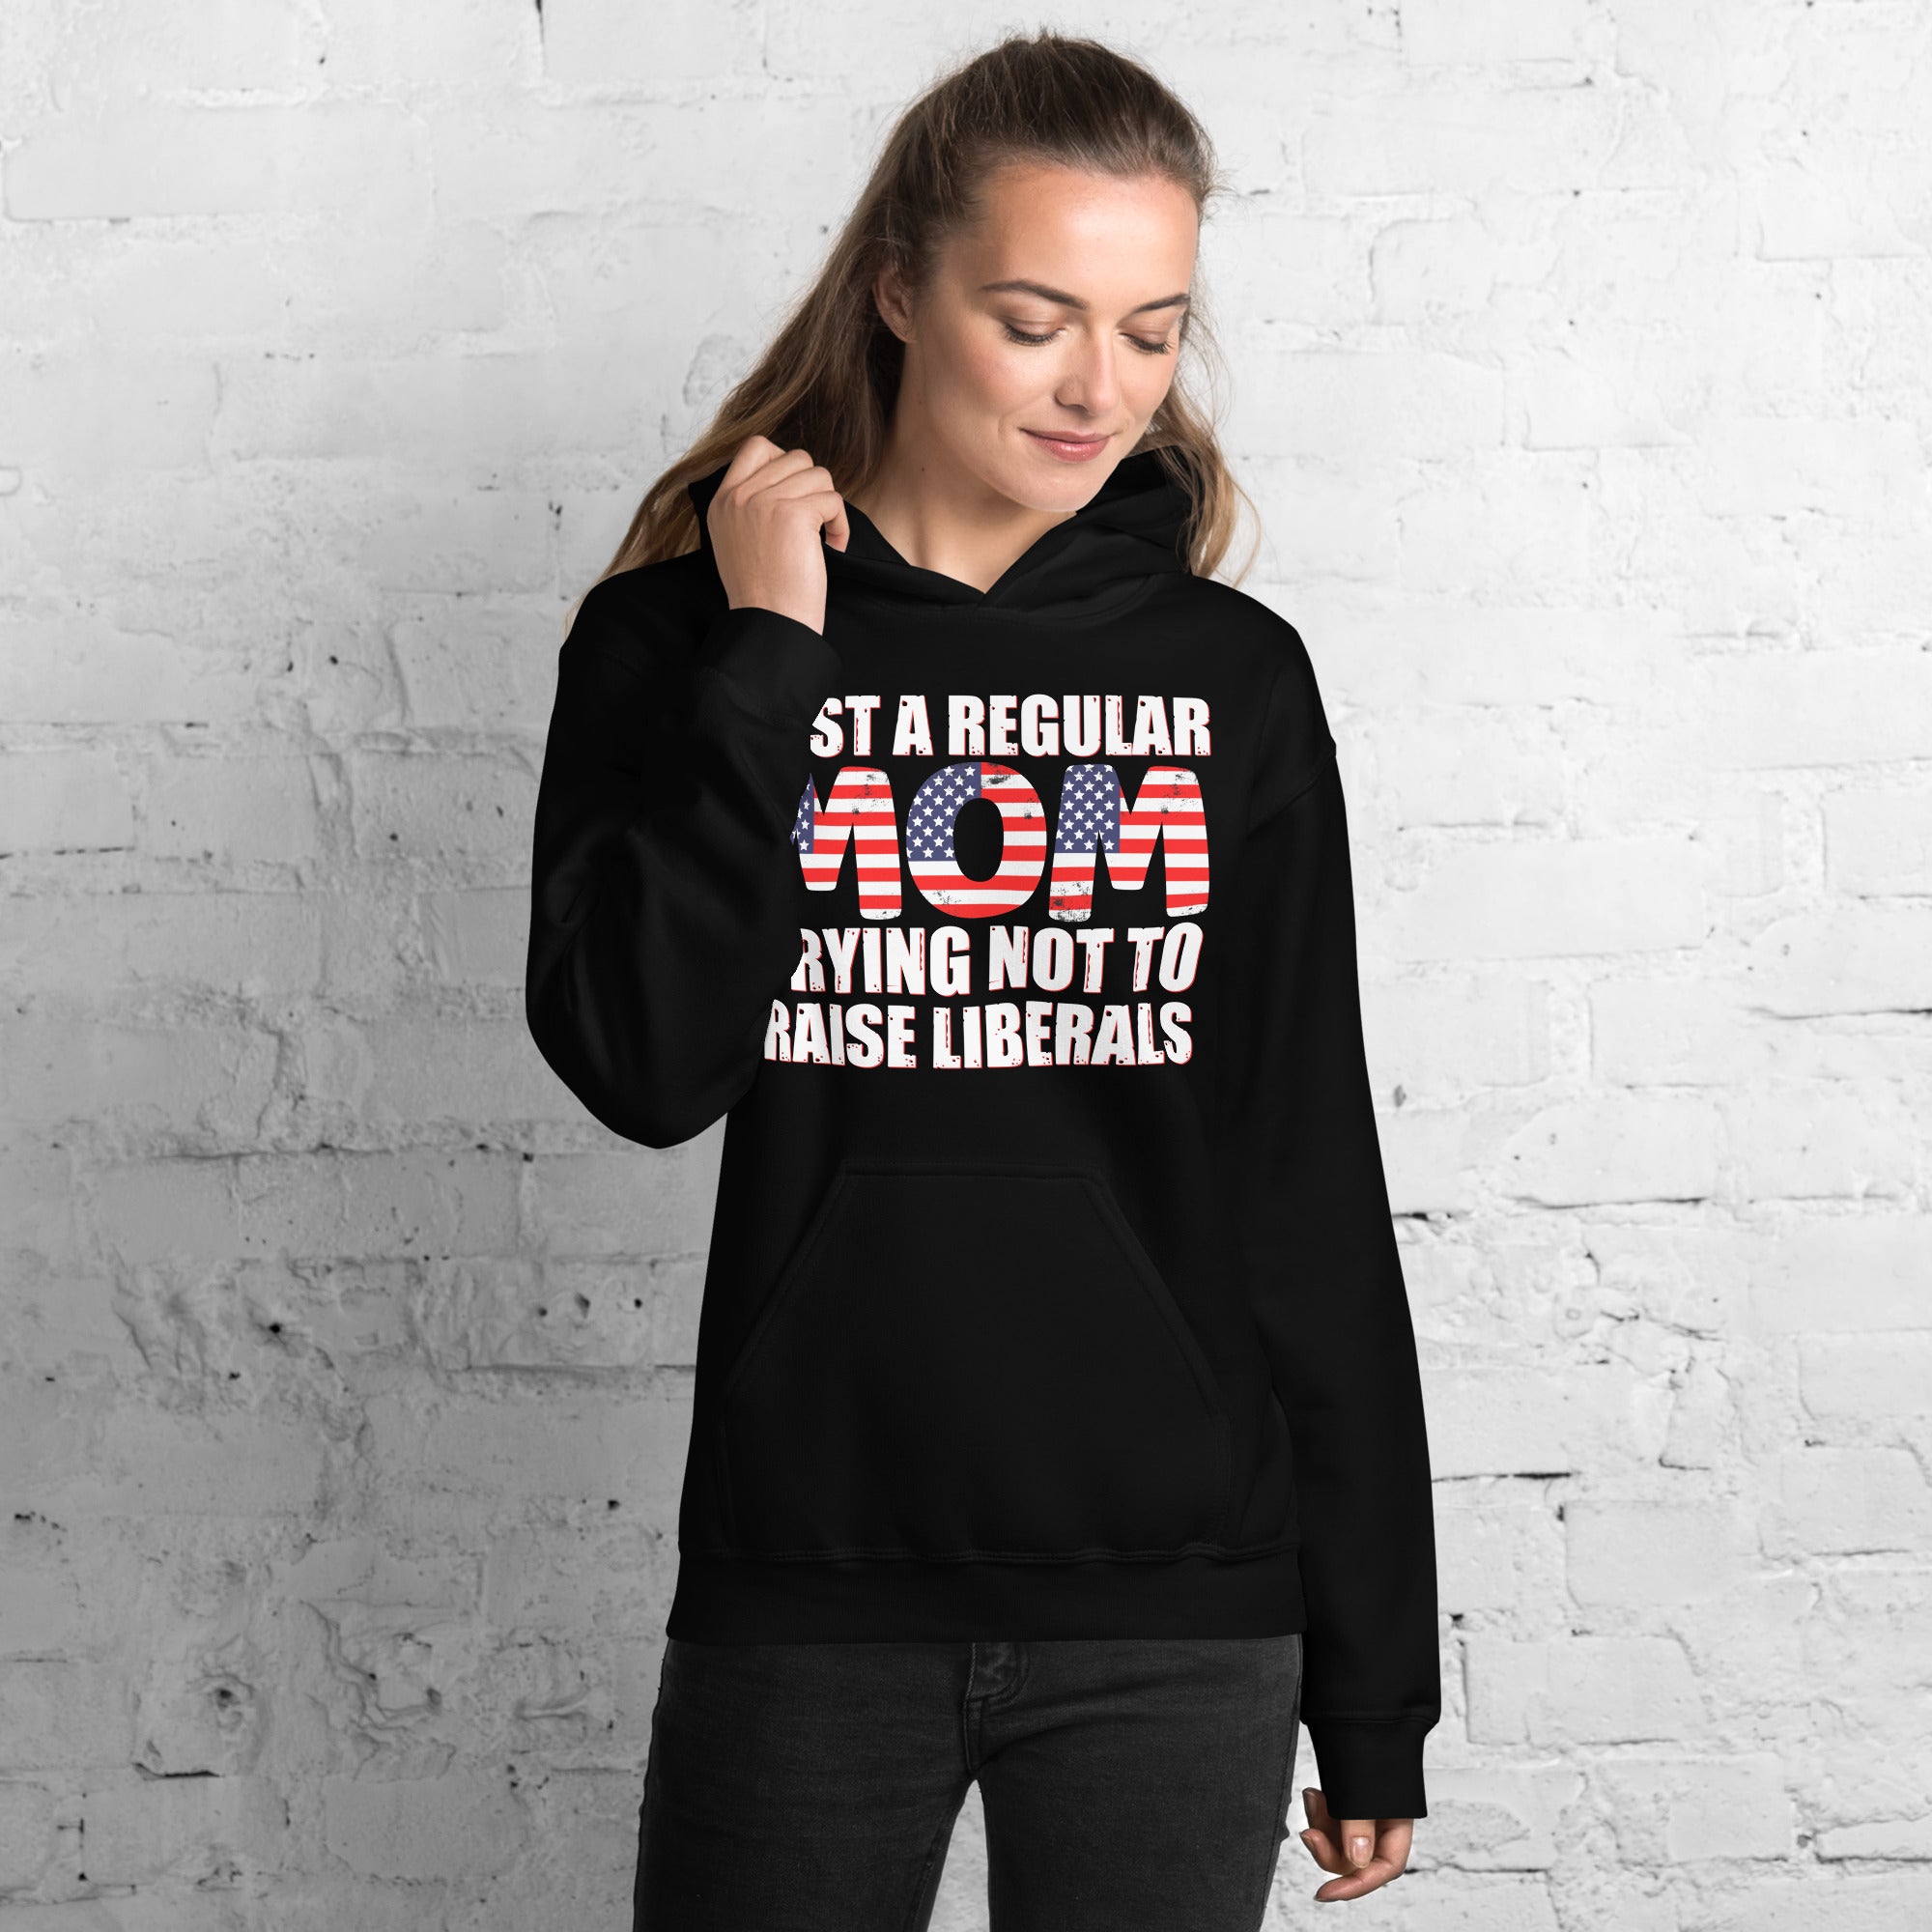 Patriotic Mom Hoodie, Just A Regular Mom Trying Not To Raise Liberals, Republican Mom Hoodie, American Patriot, Regular Mom, Mother Gifts - Madeinsea©